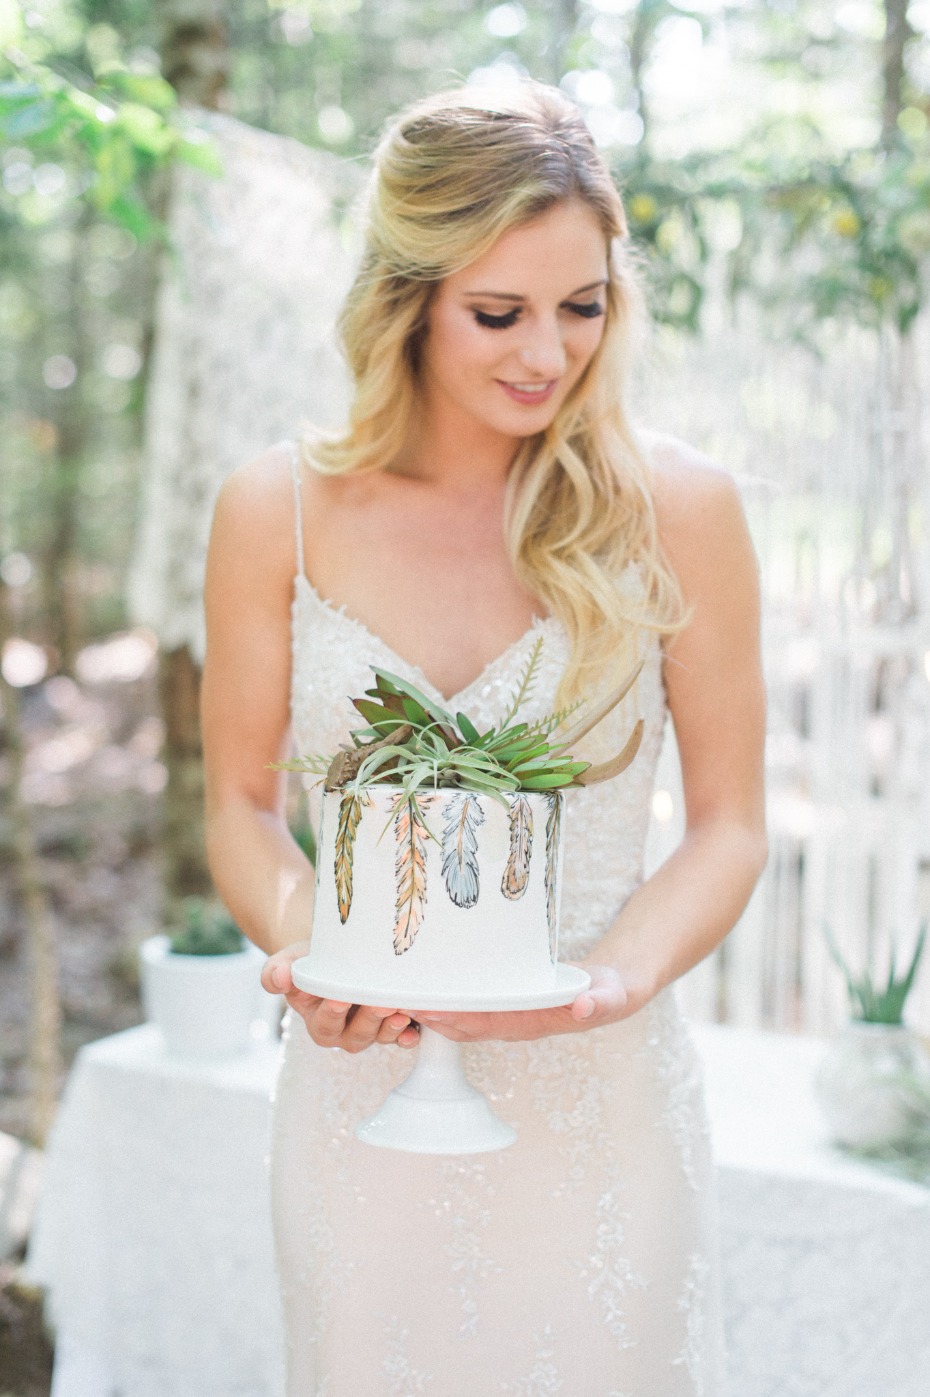 Mini cake with feathers and greenery topper